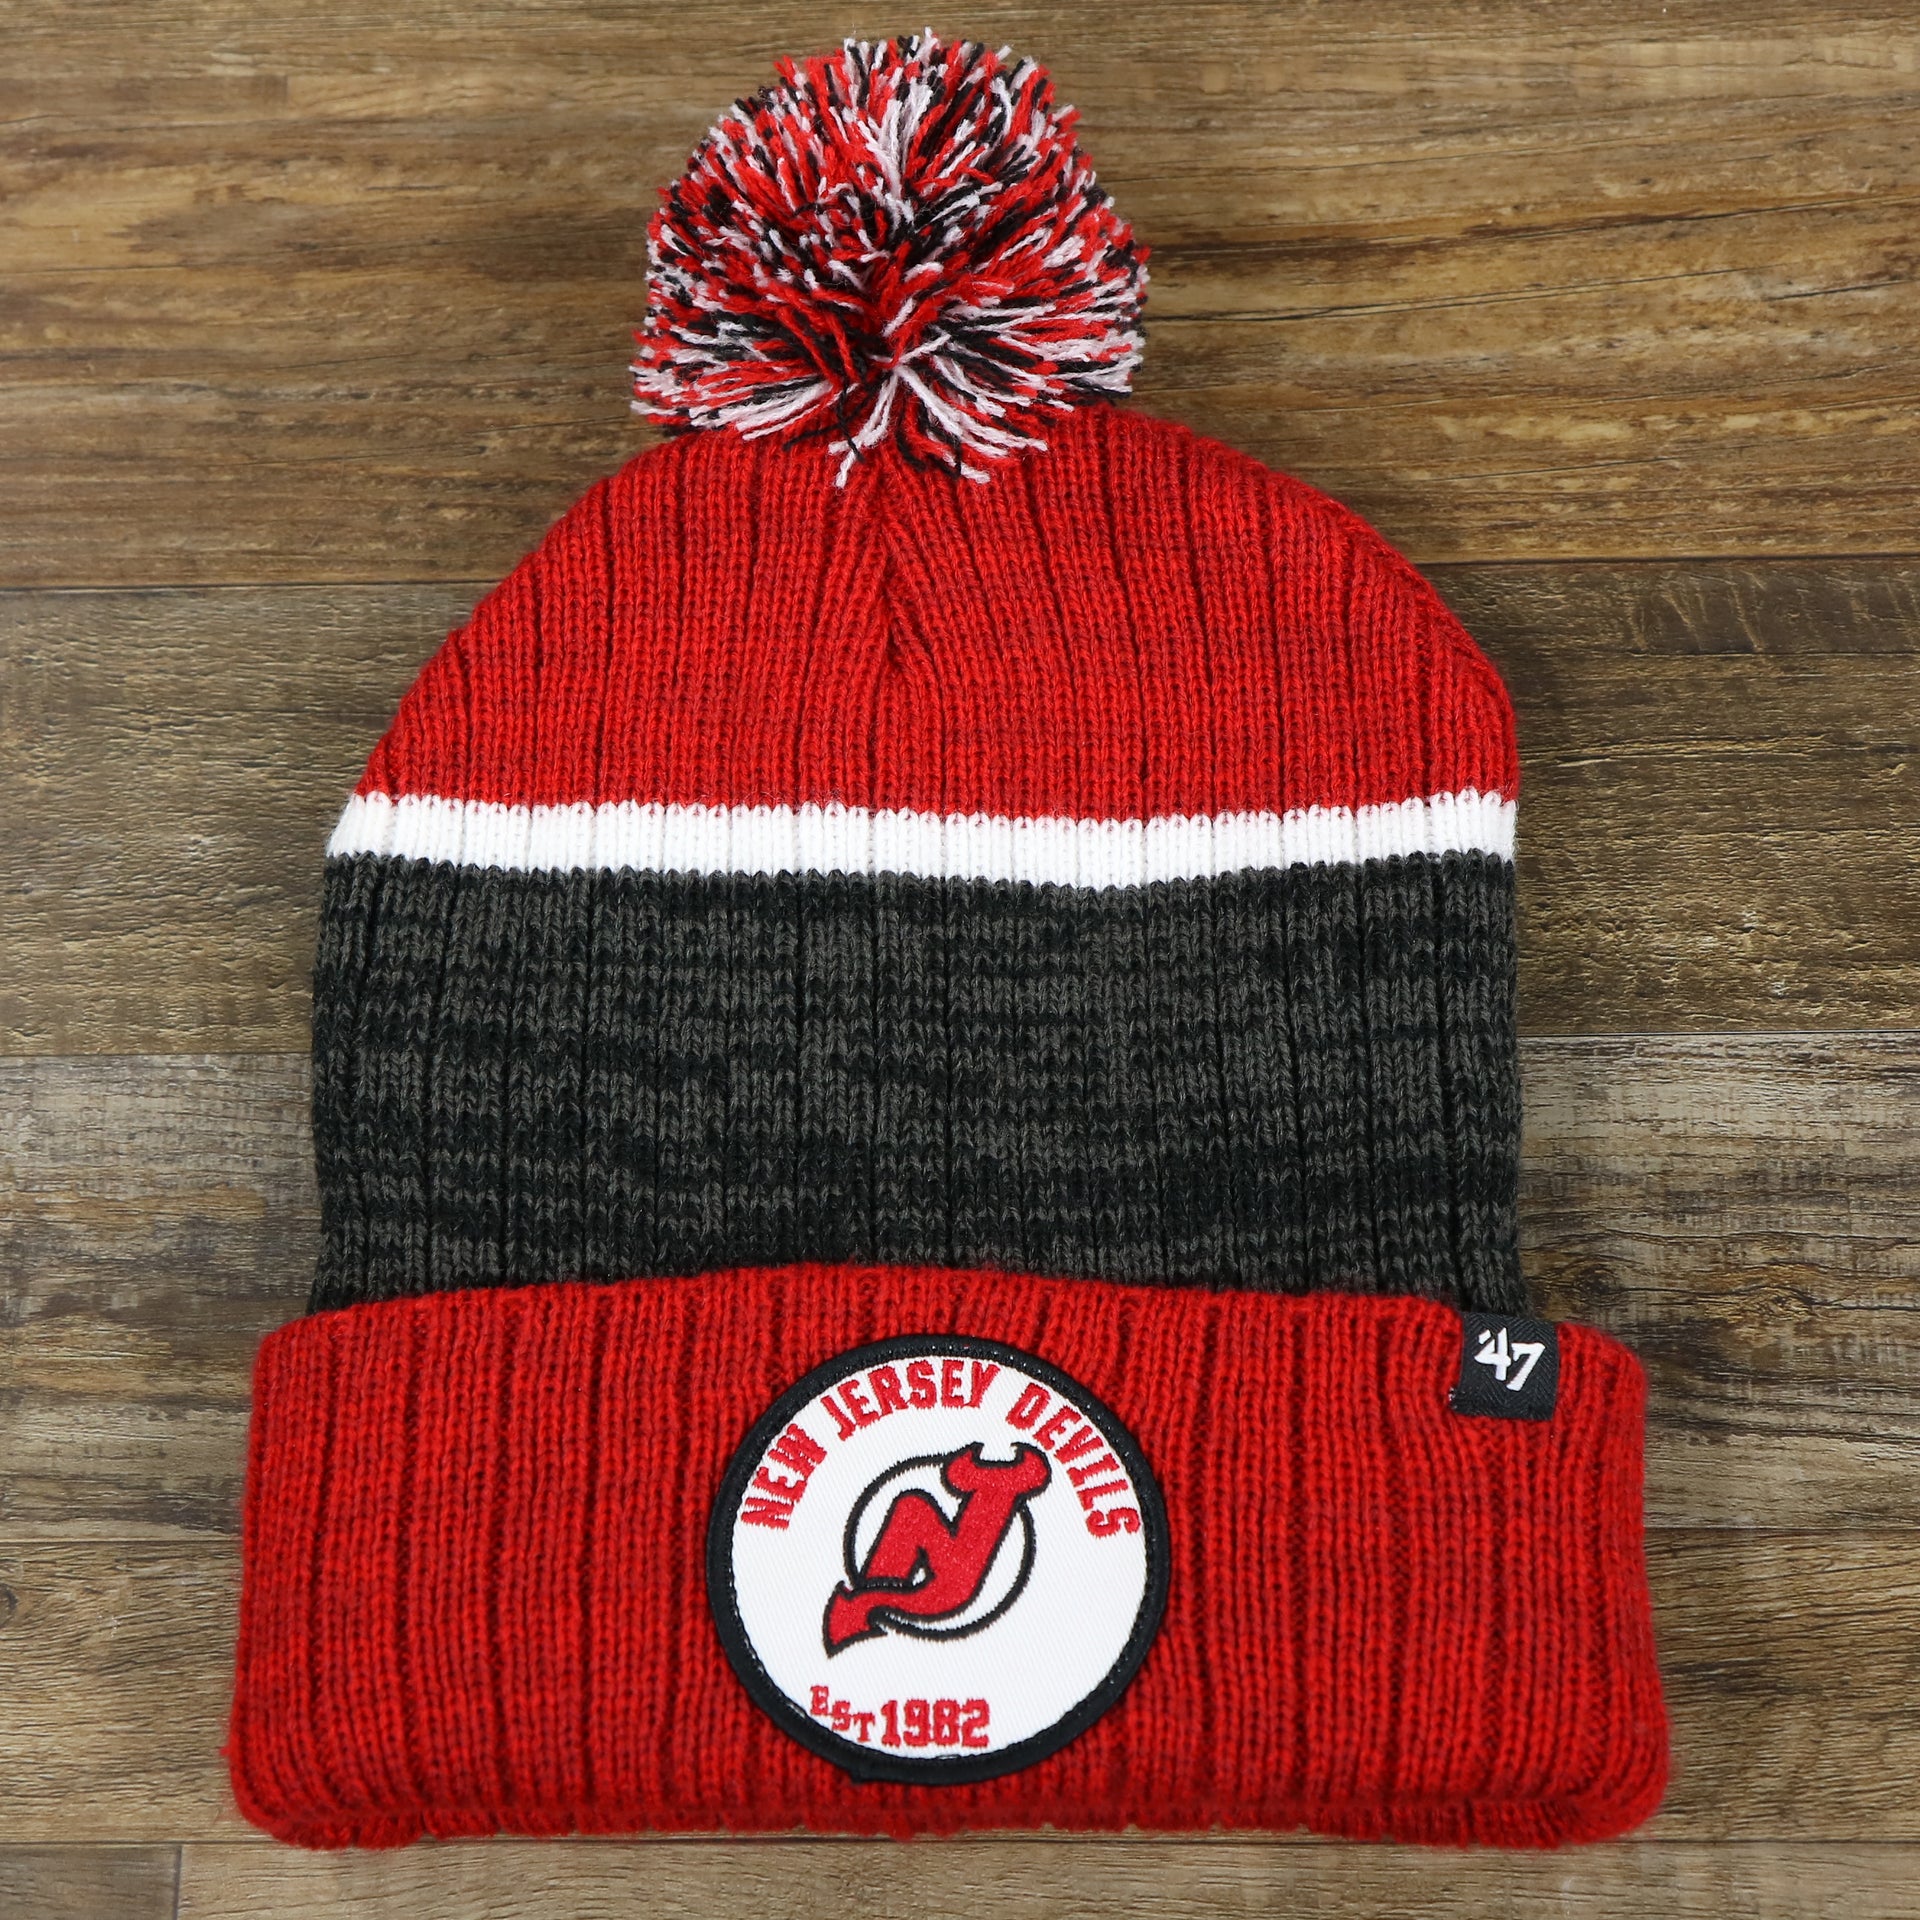 The front of the New Jersey Devils Cuffed Logo Striped Winter Beanie With Pom Pom | Red and Gray Winter Beanie